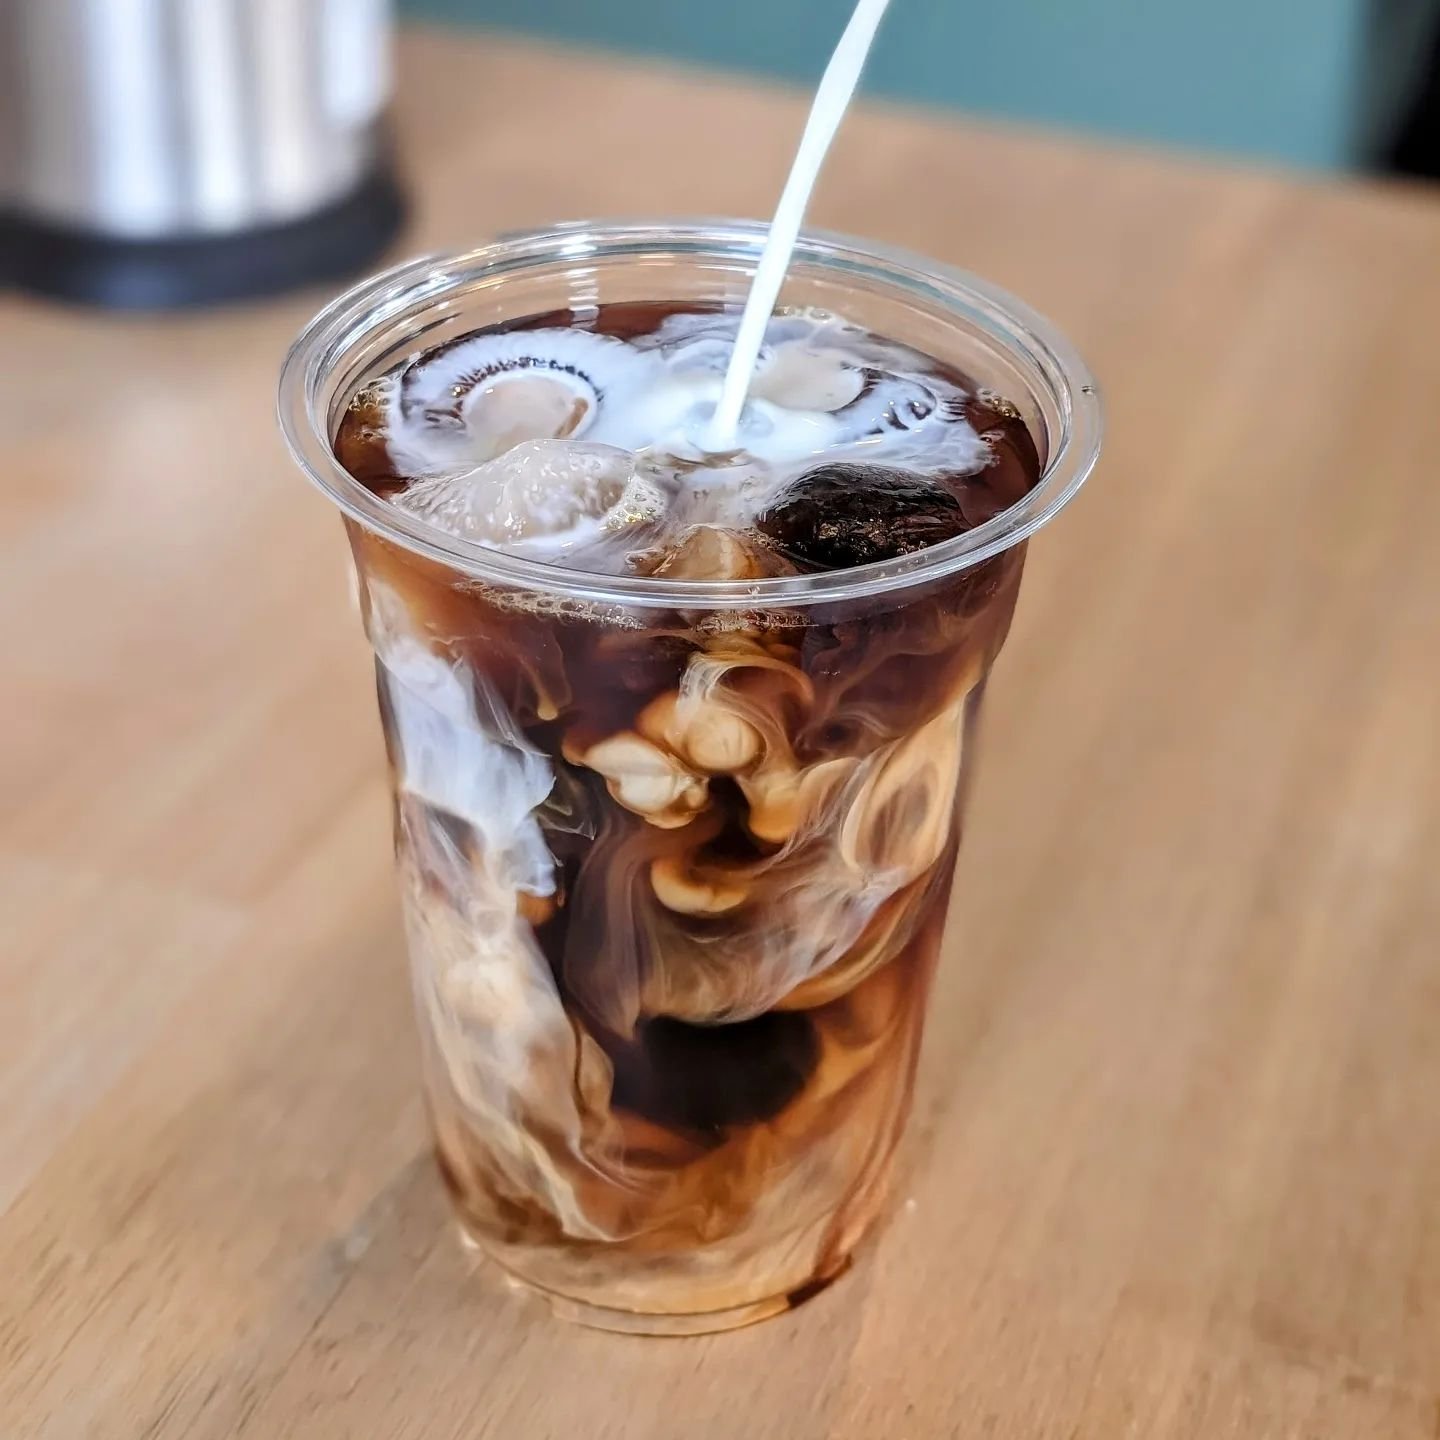 Happy National Cold Brew Day! ☕️ 

Celebrate with our refreshing cold brew, brewed in house with slow-steeped @ugcoffeehouse for a smooth, delicious taste! 

We are here until 2pm serving up your favorite bagel sandwiches and drinks!

Skip the line a